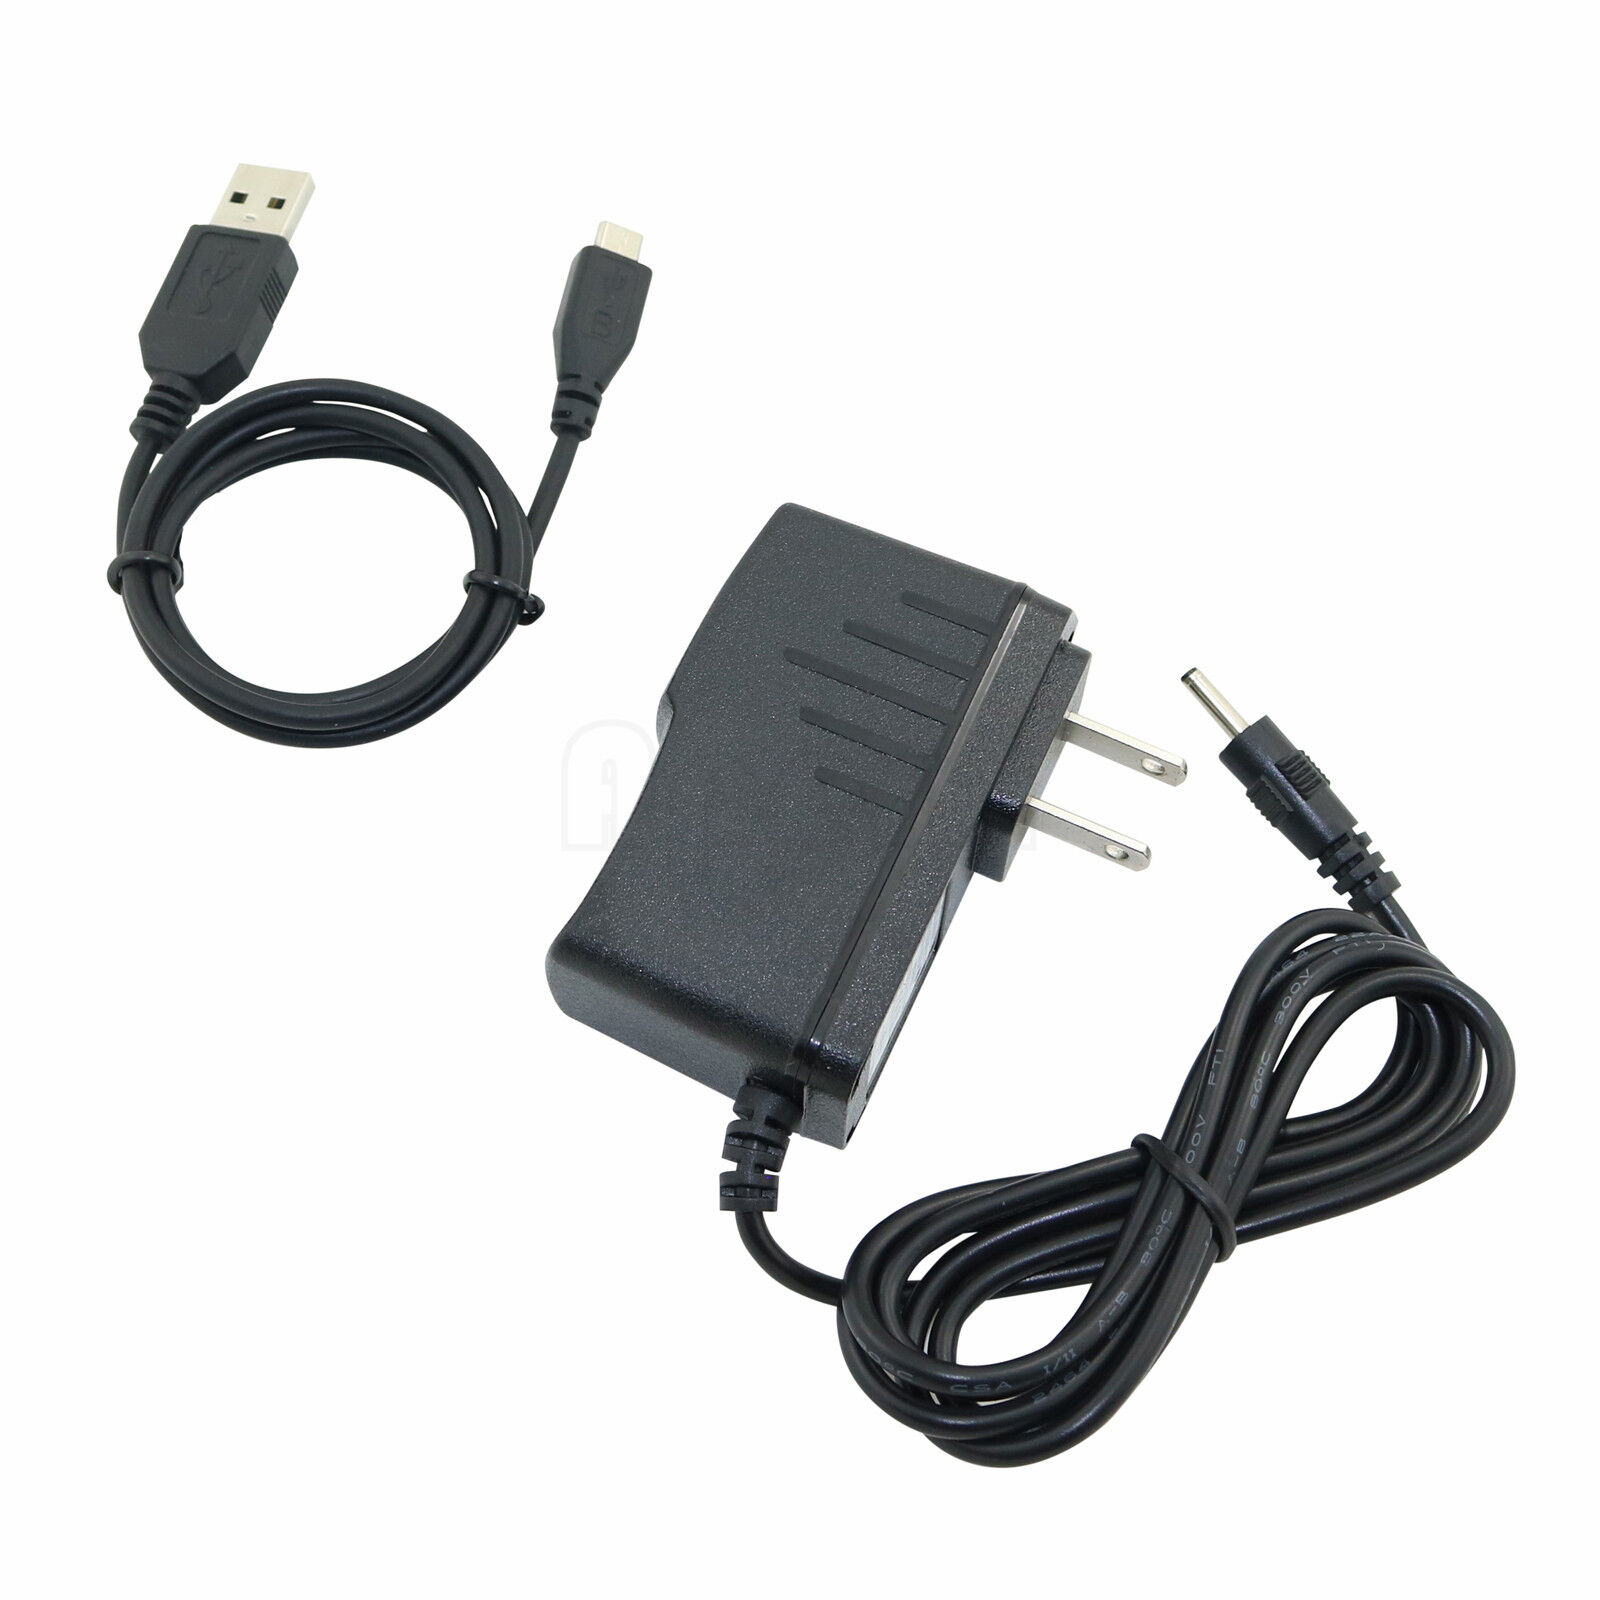 AC/DC Adapter Power Charger + USB Cord Cable For Dragon Touch X10 Tablet 10.6" AC/DC Adapter Power Charger + USB Cord C